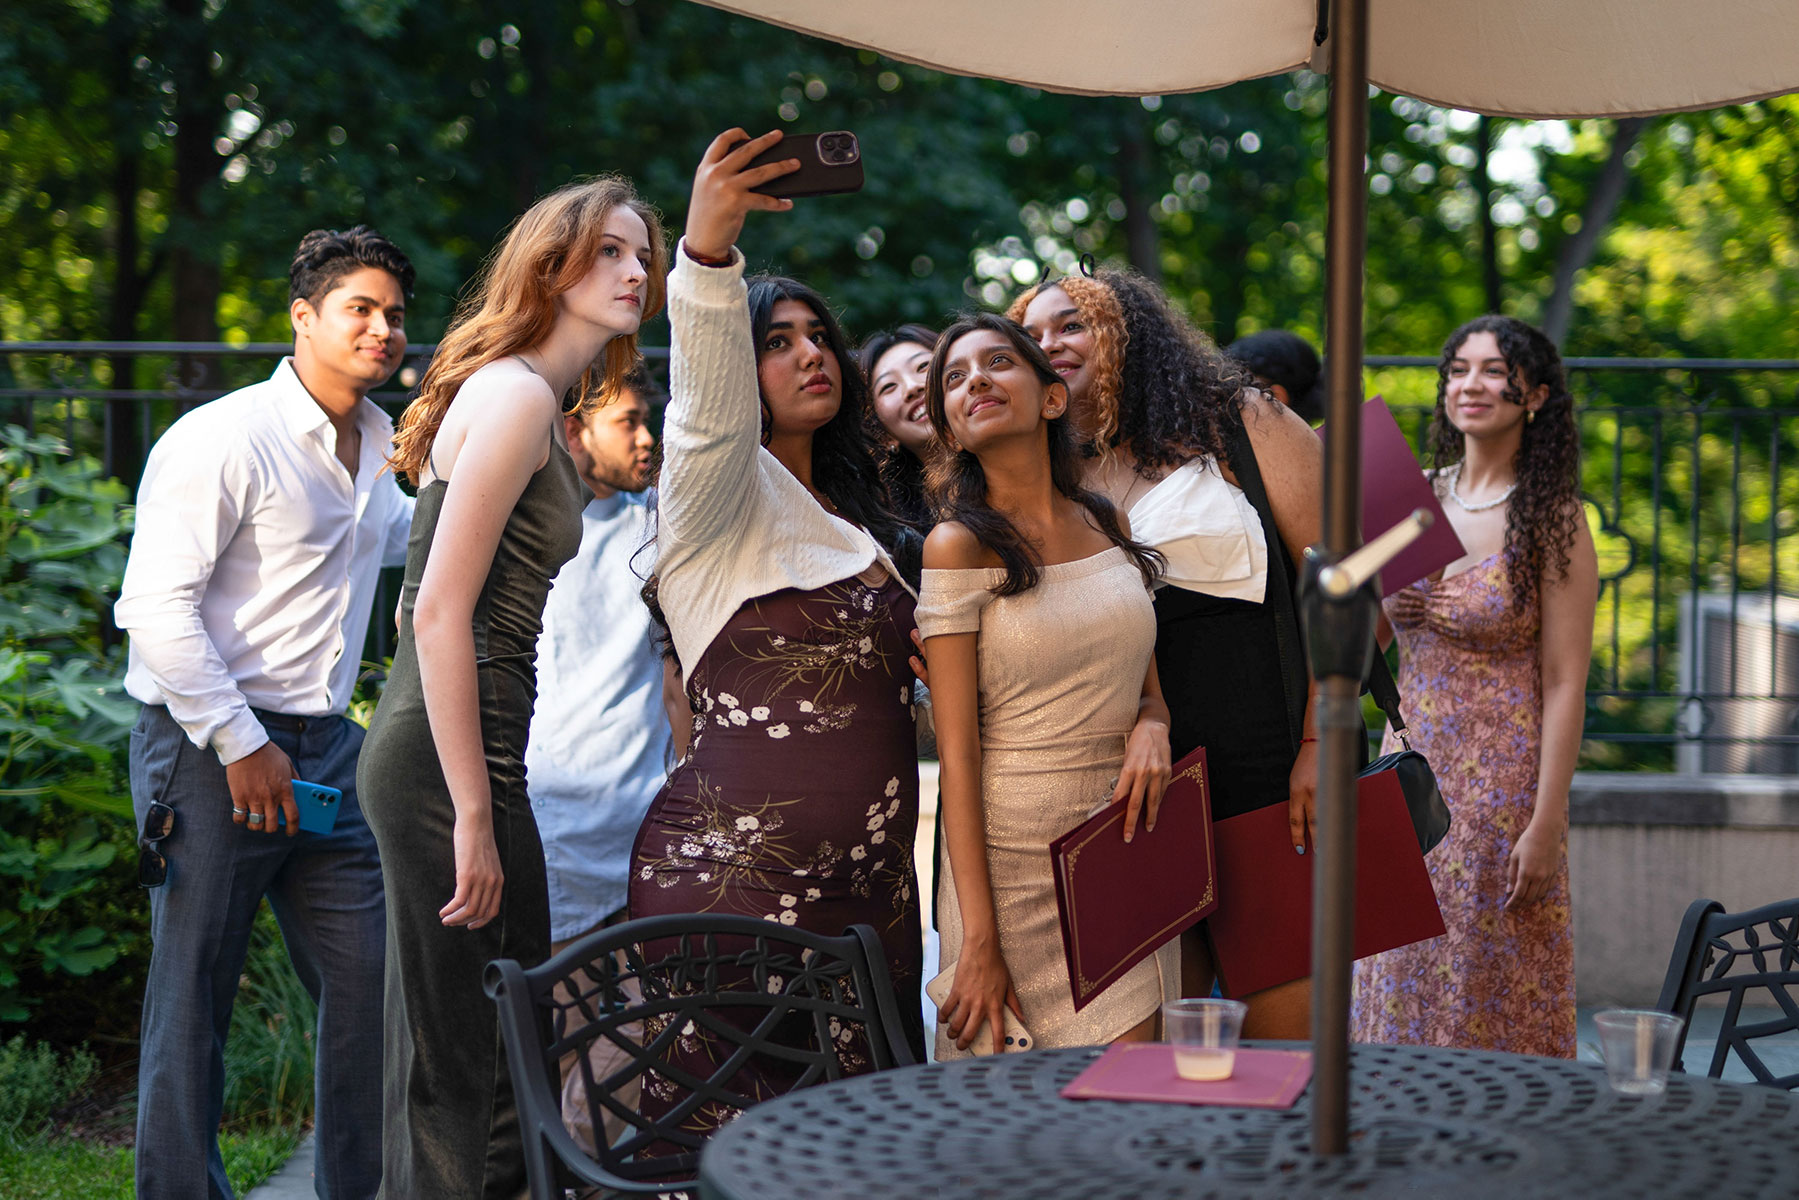 A large group of people huddled together outside with one person holding up their phone for a group selfie.